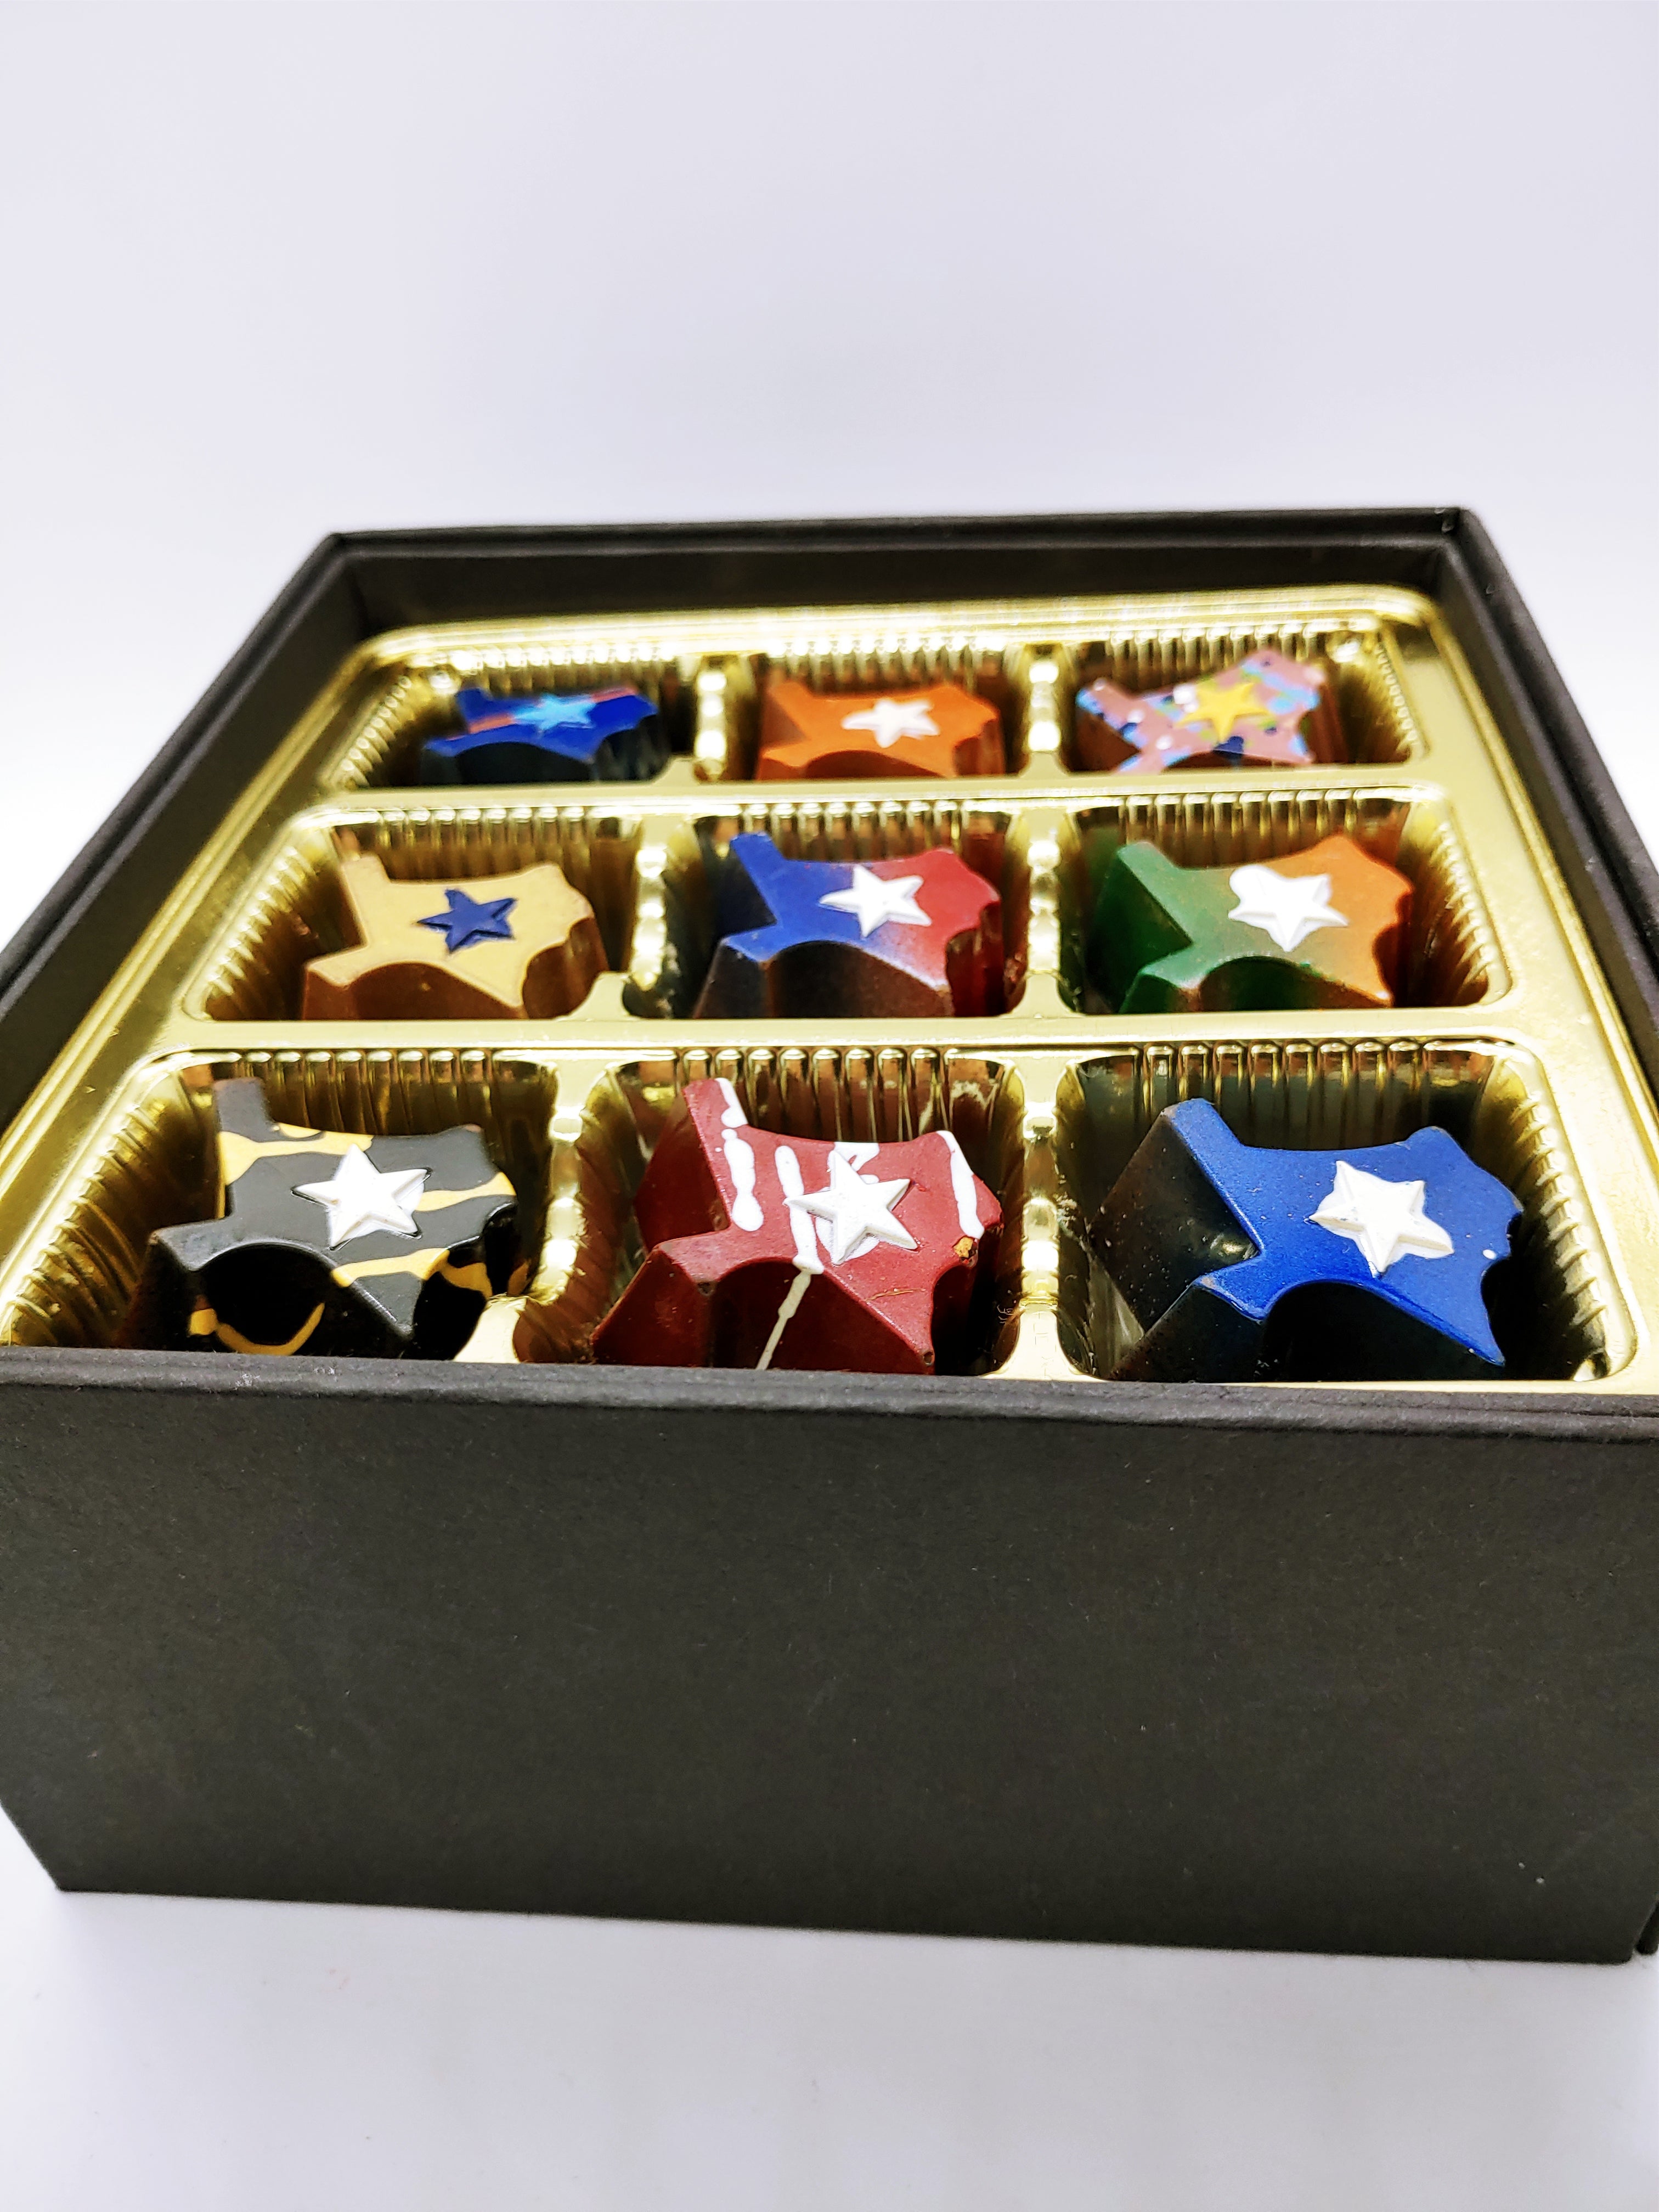 2 Tier Gift Tower-9 Texas Truffles & 8oz Texas Toffee Collections